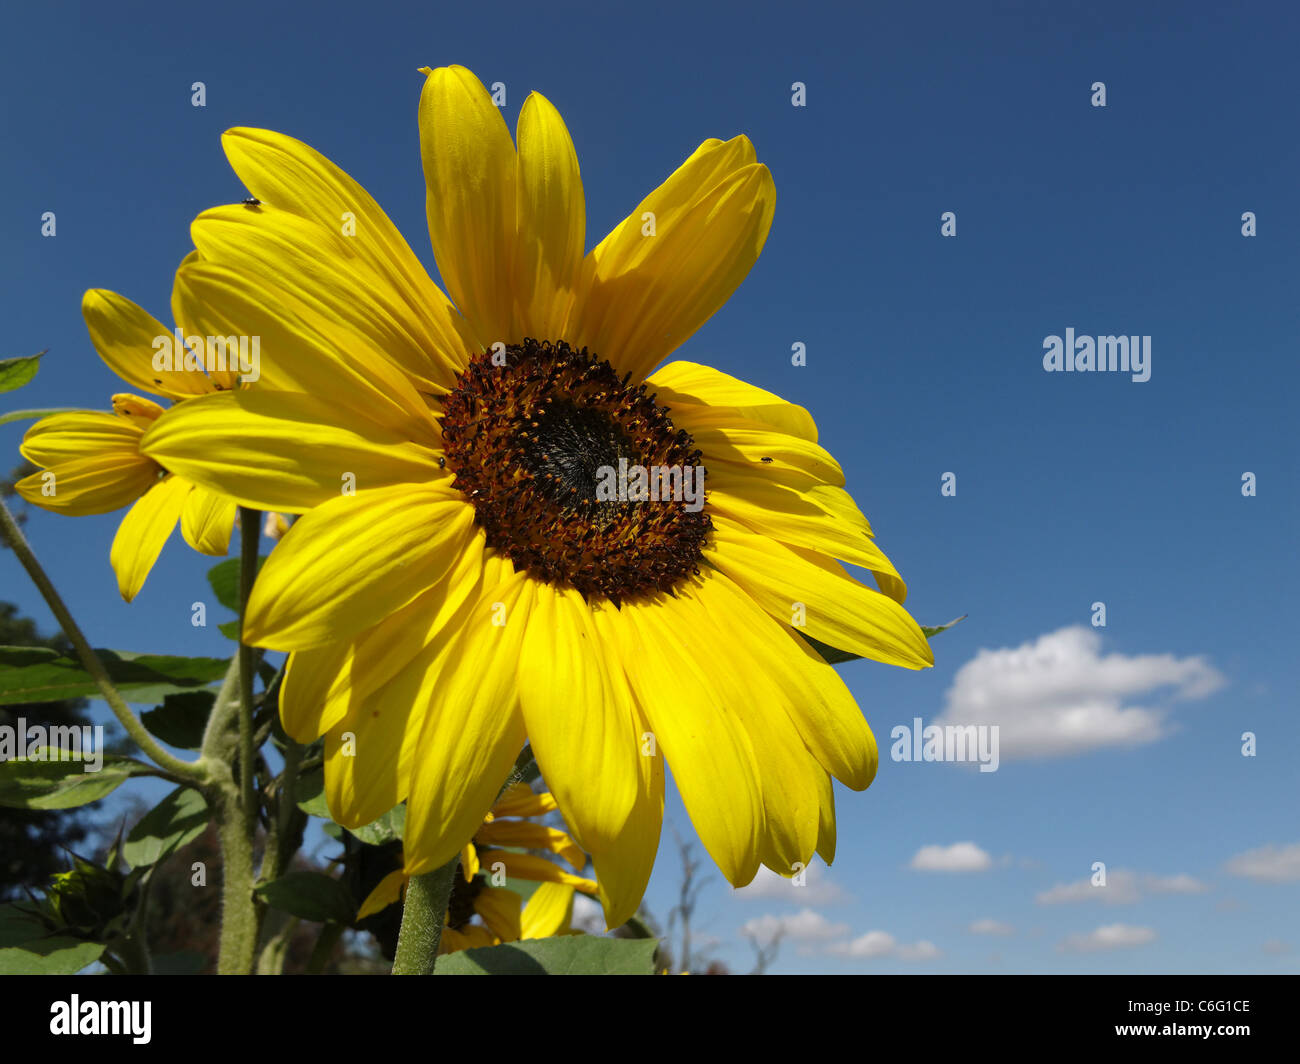 A Sunflower (Helianthus annuus) on a summer's day. Stock Photo